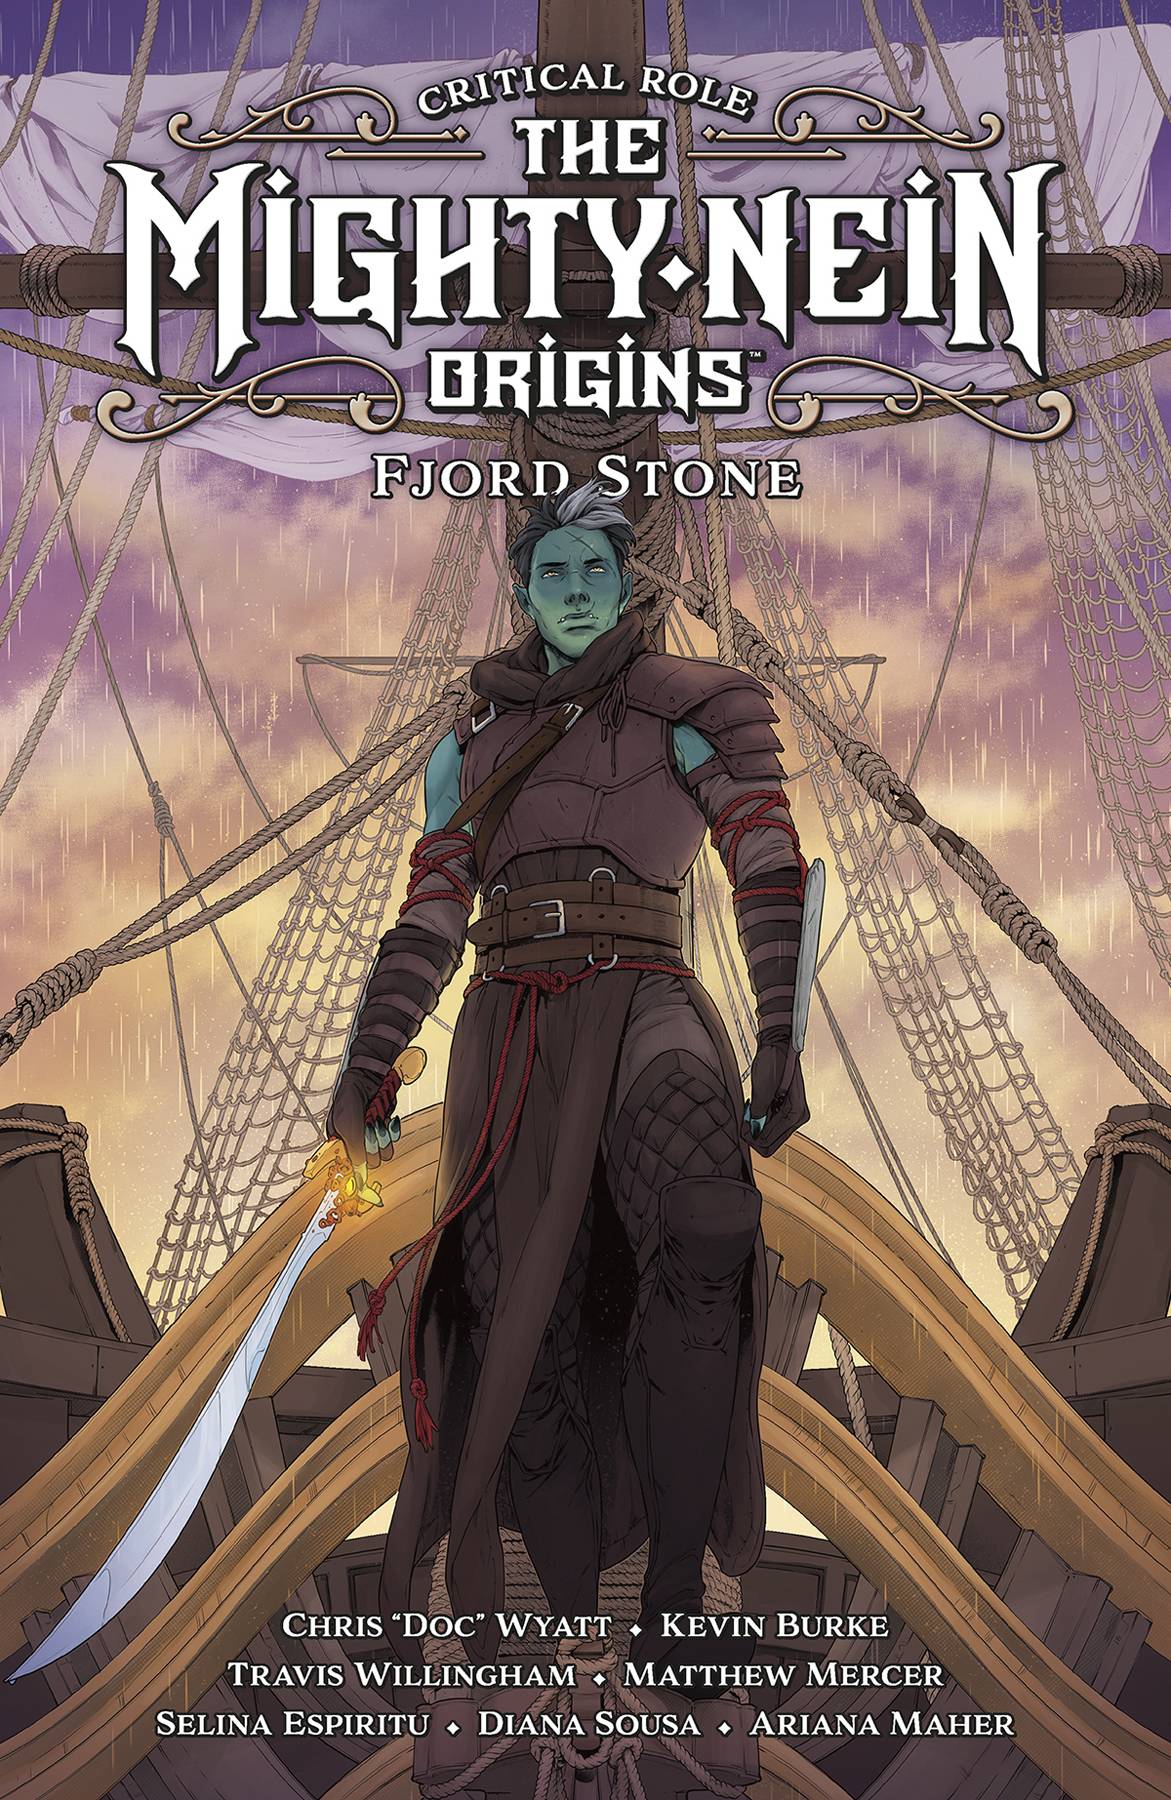 CRITICAL ROLE MIGHTY NEIN ORIGINS HC FJORD